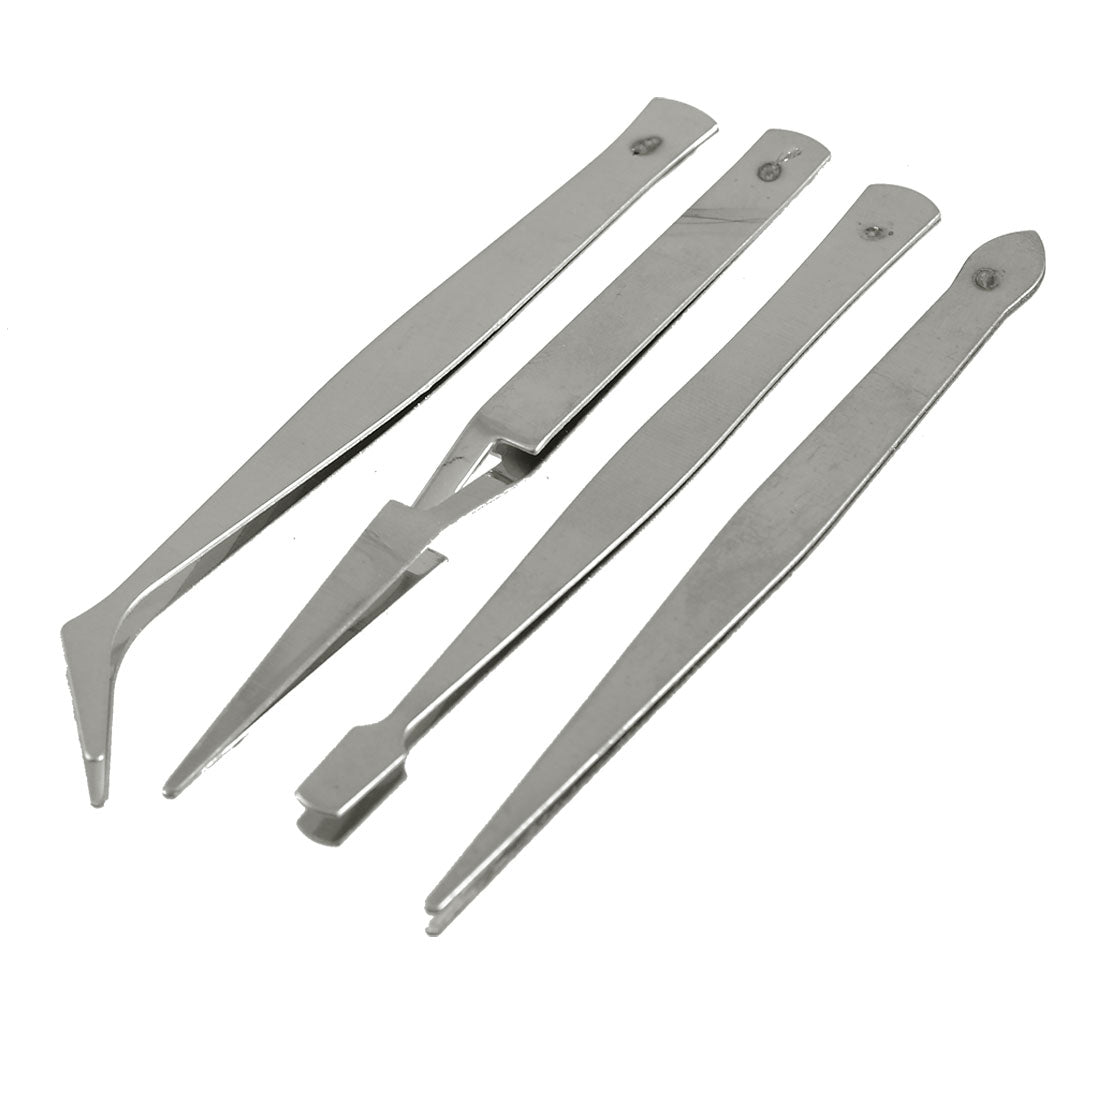 Harfington 4 Pcs Silver Tone Pointed Flat Curved Cross Action Tweezers Tools